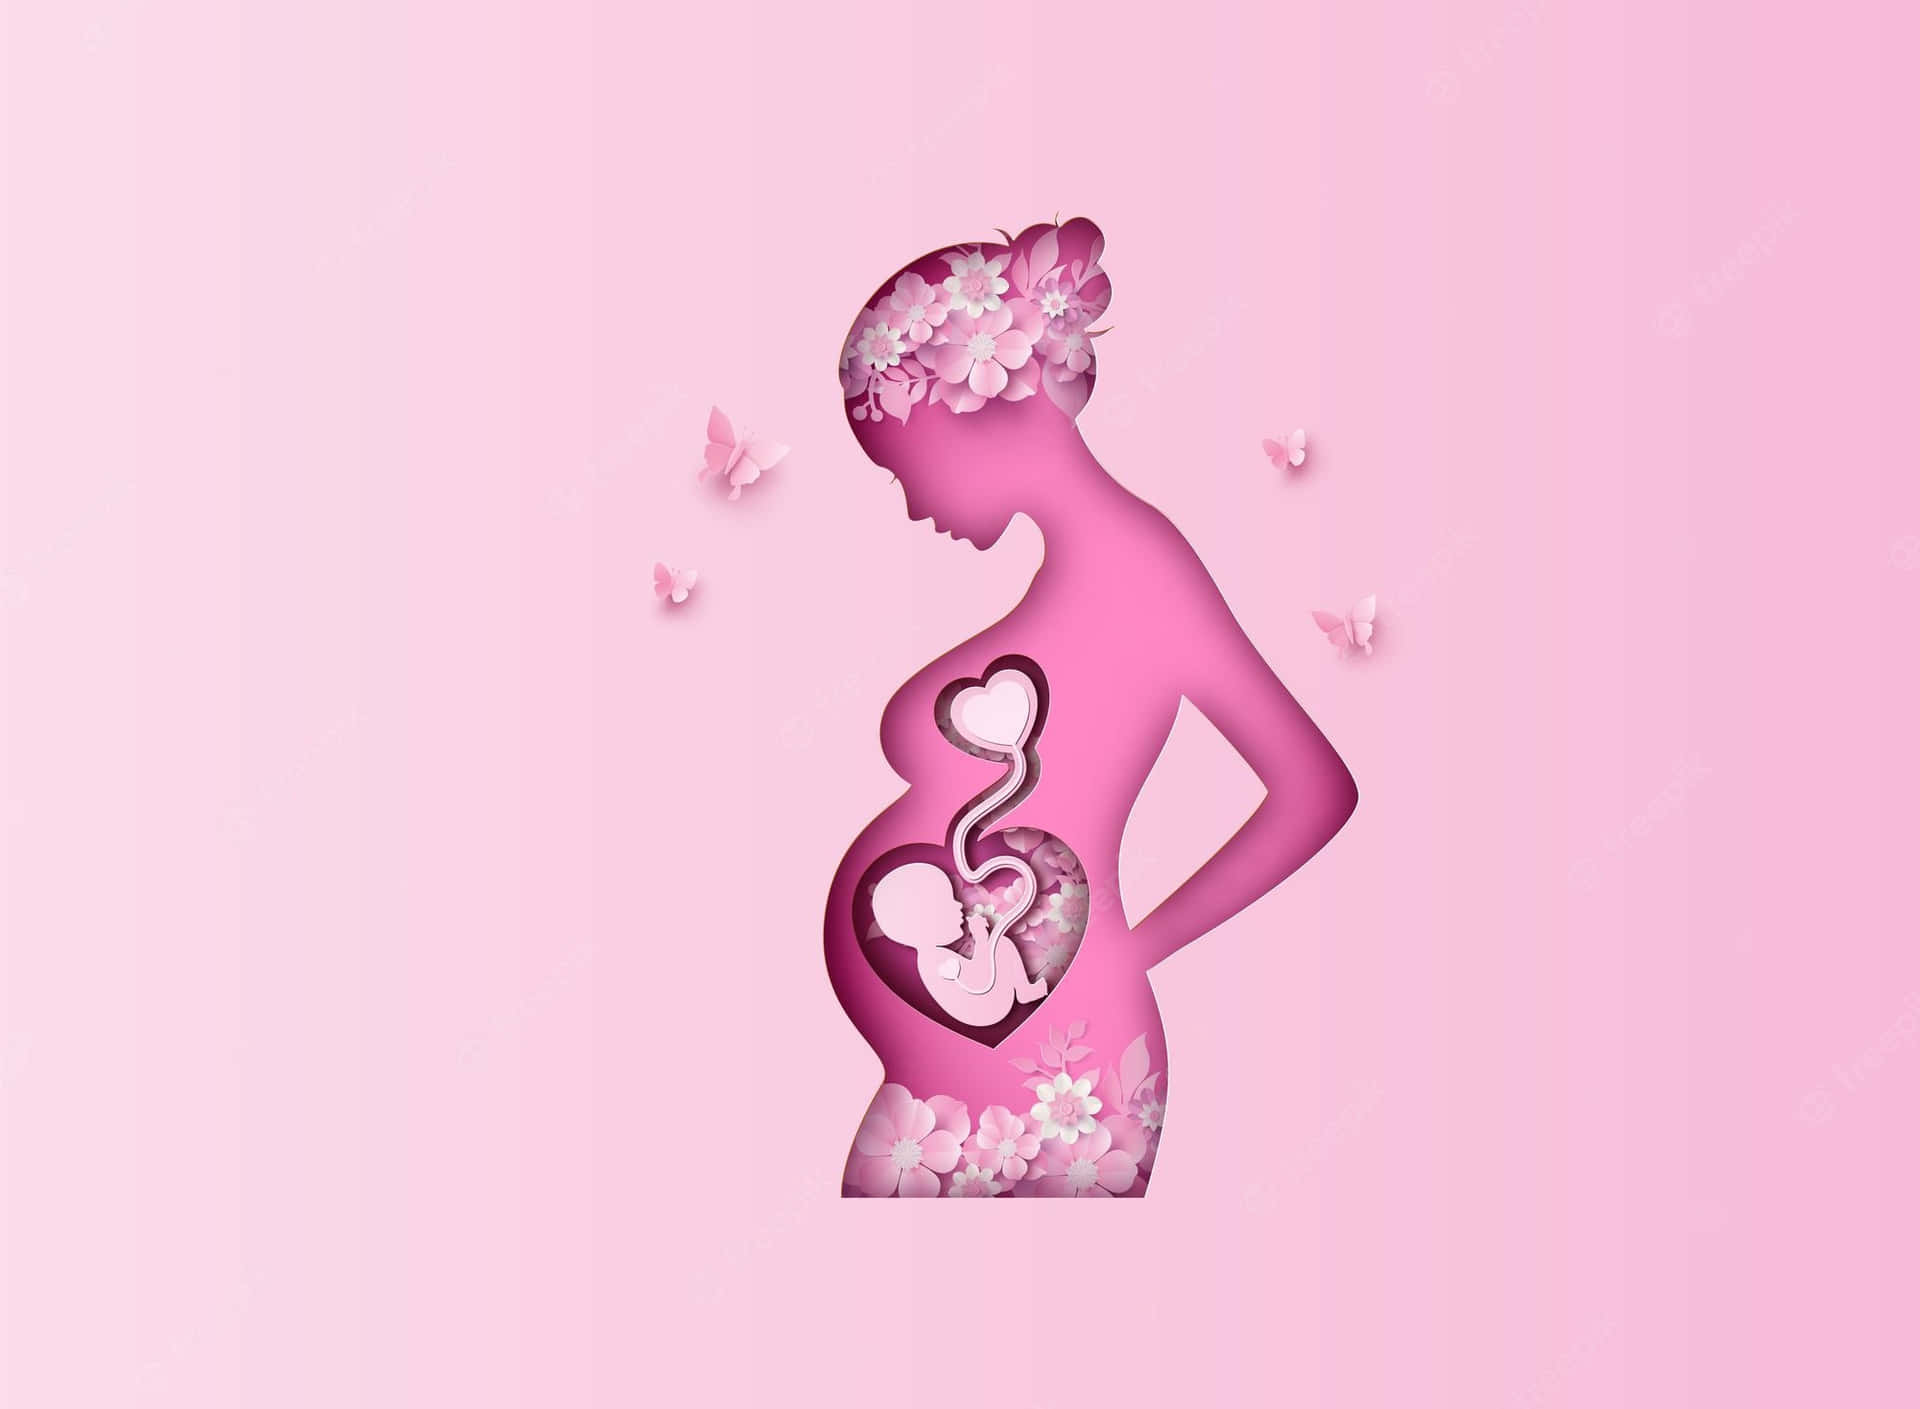 Download Pregnant Woman Baby And Heart Wallpaper | Wallpapers.com